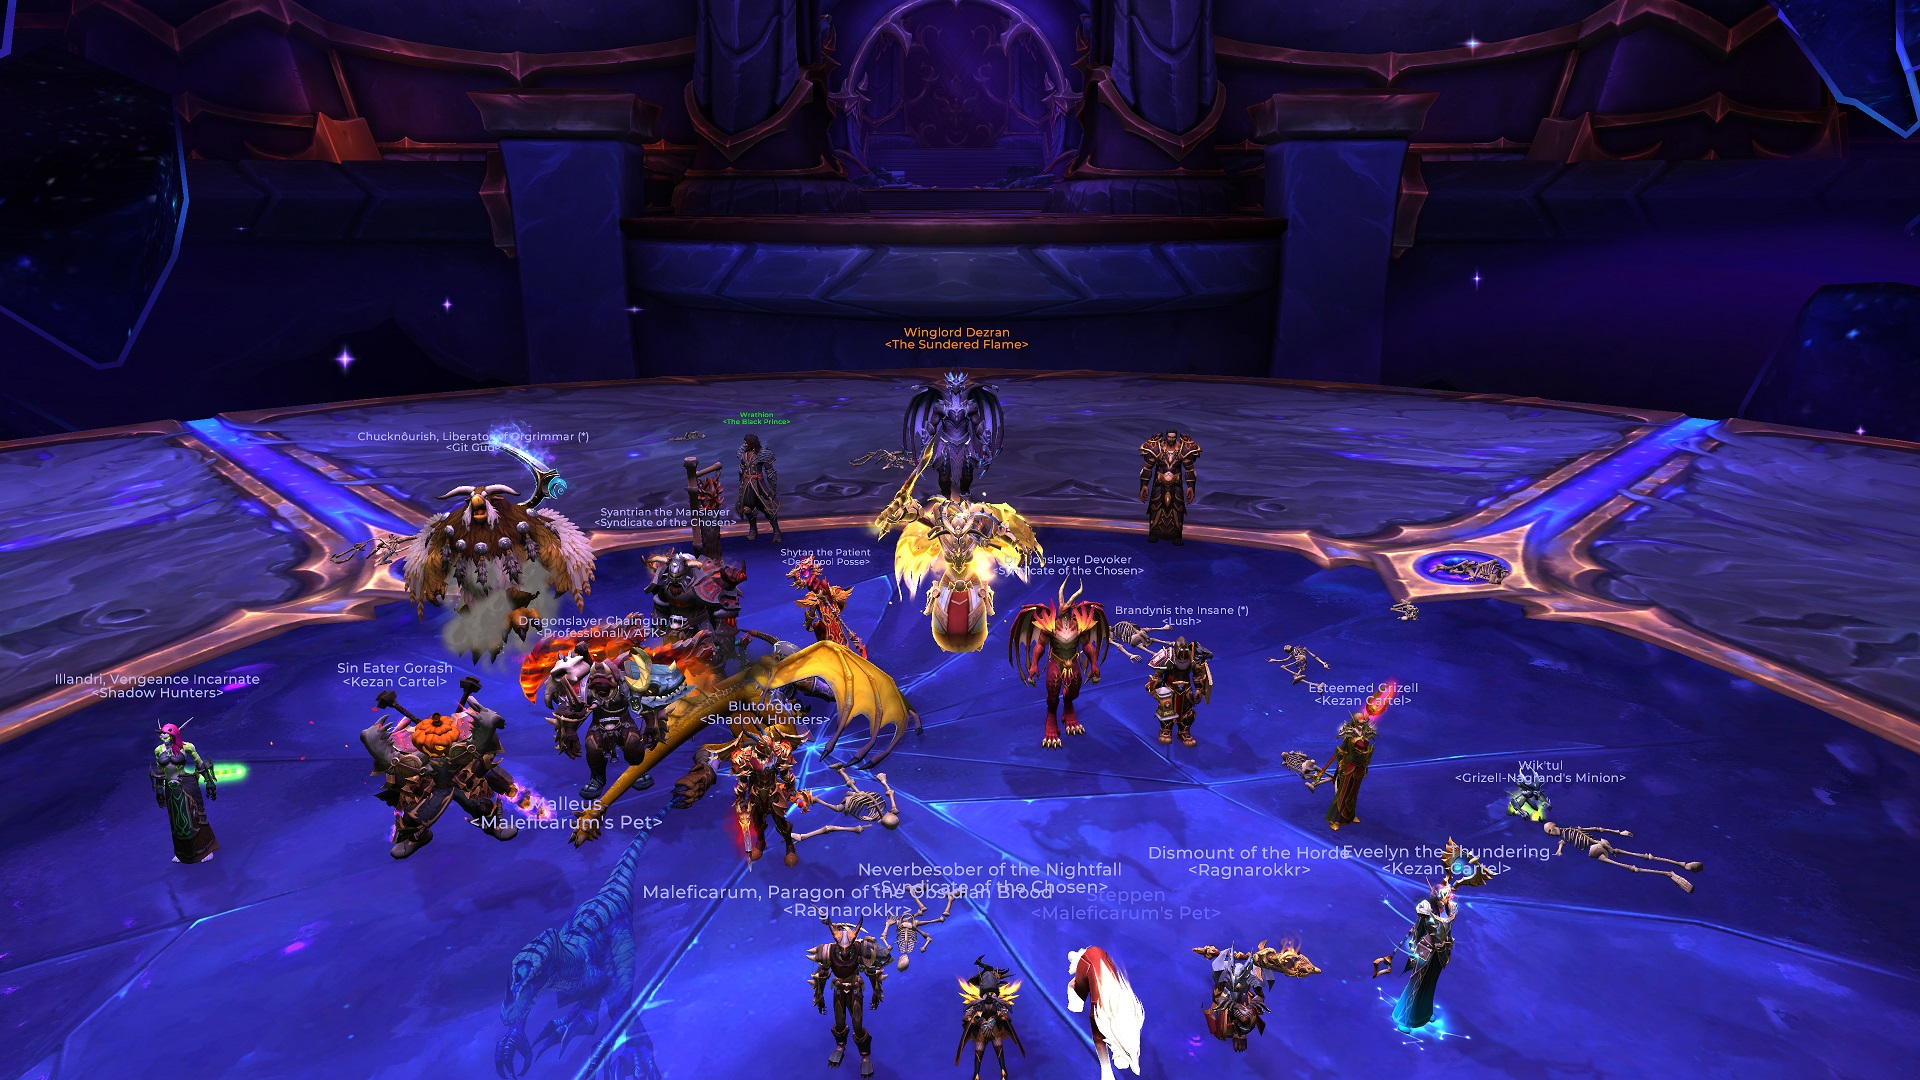 The raid team standing in front of the defeated final boss